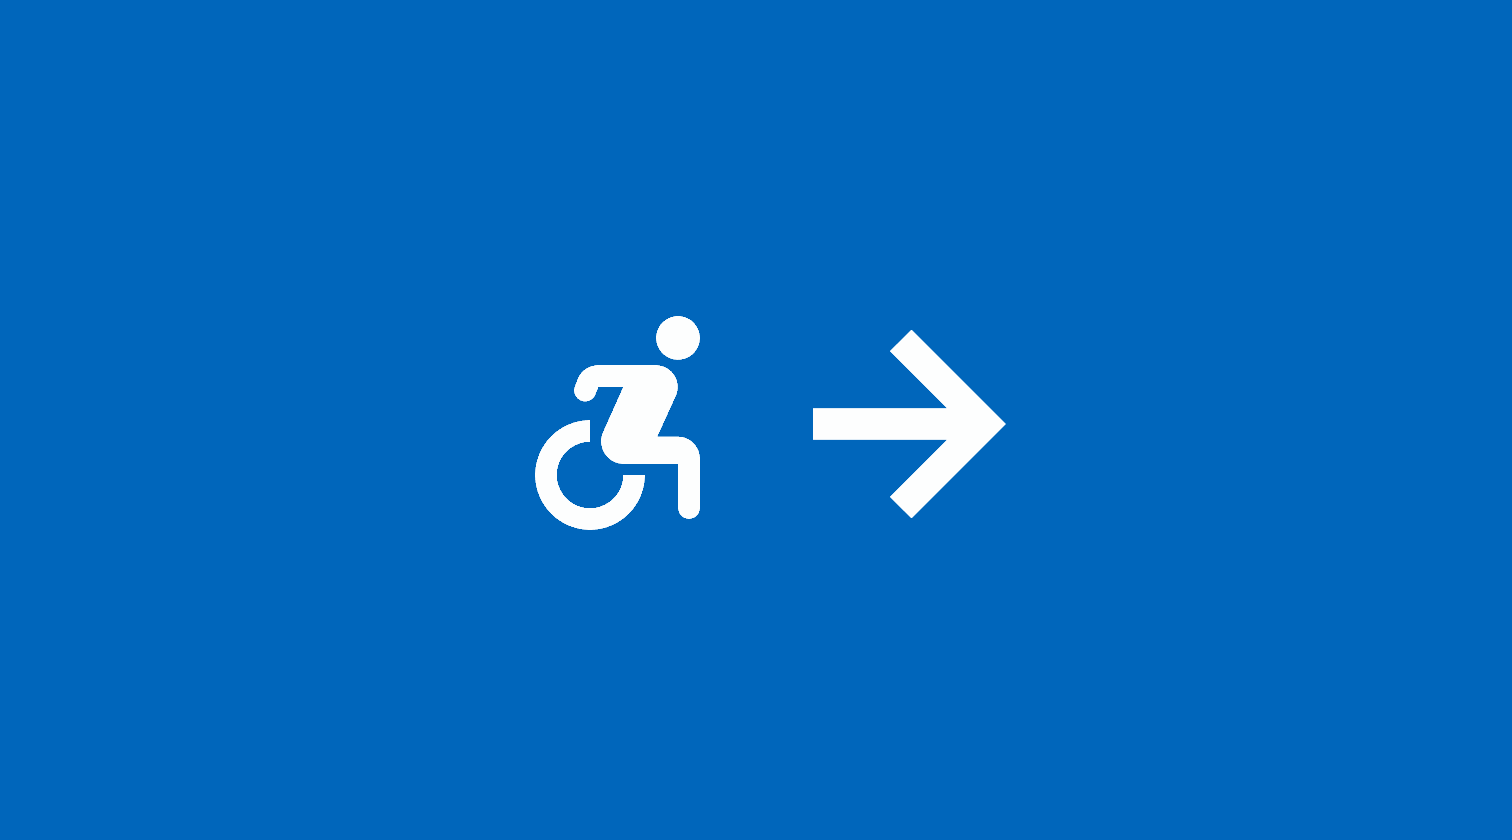 Accessibility icon (depicting a person in a wheelchair) with an arrow depicting forward movement